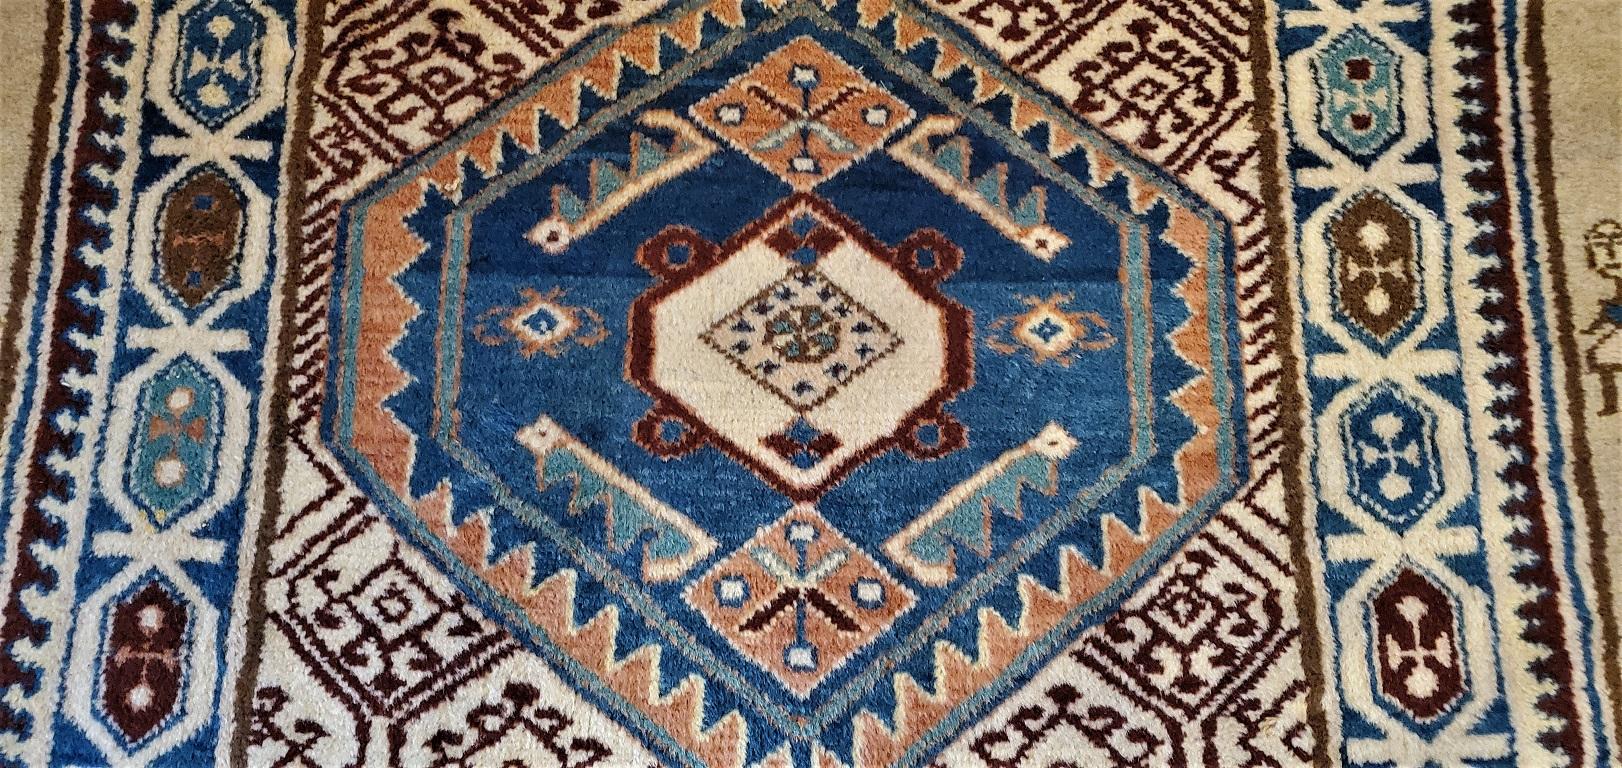 Vintage Afghan Tribal Square Prayer Rug In Good Condition For Sale In Dallas, TX